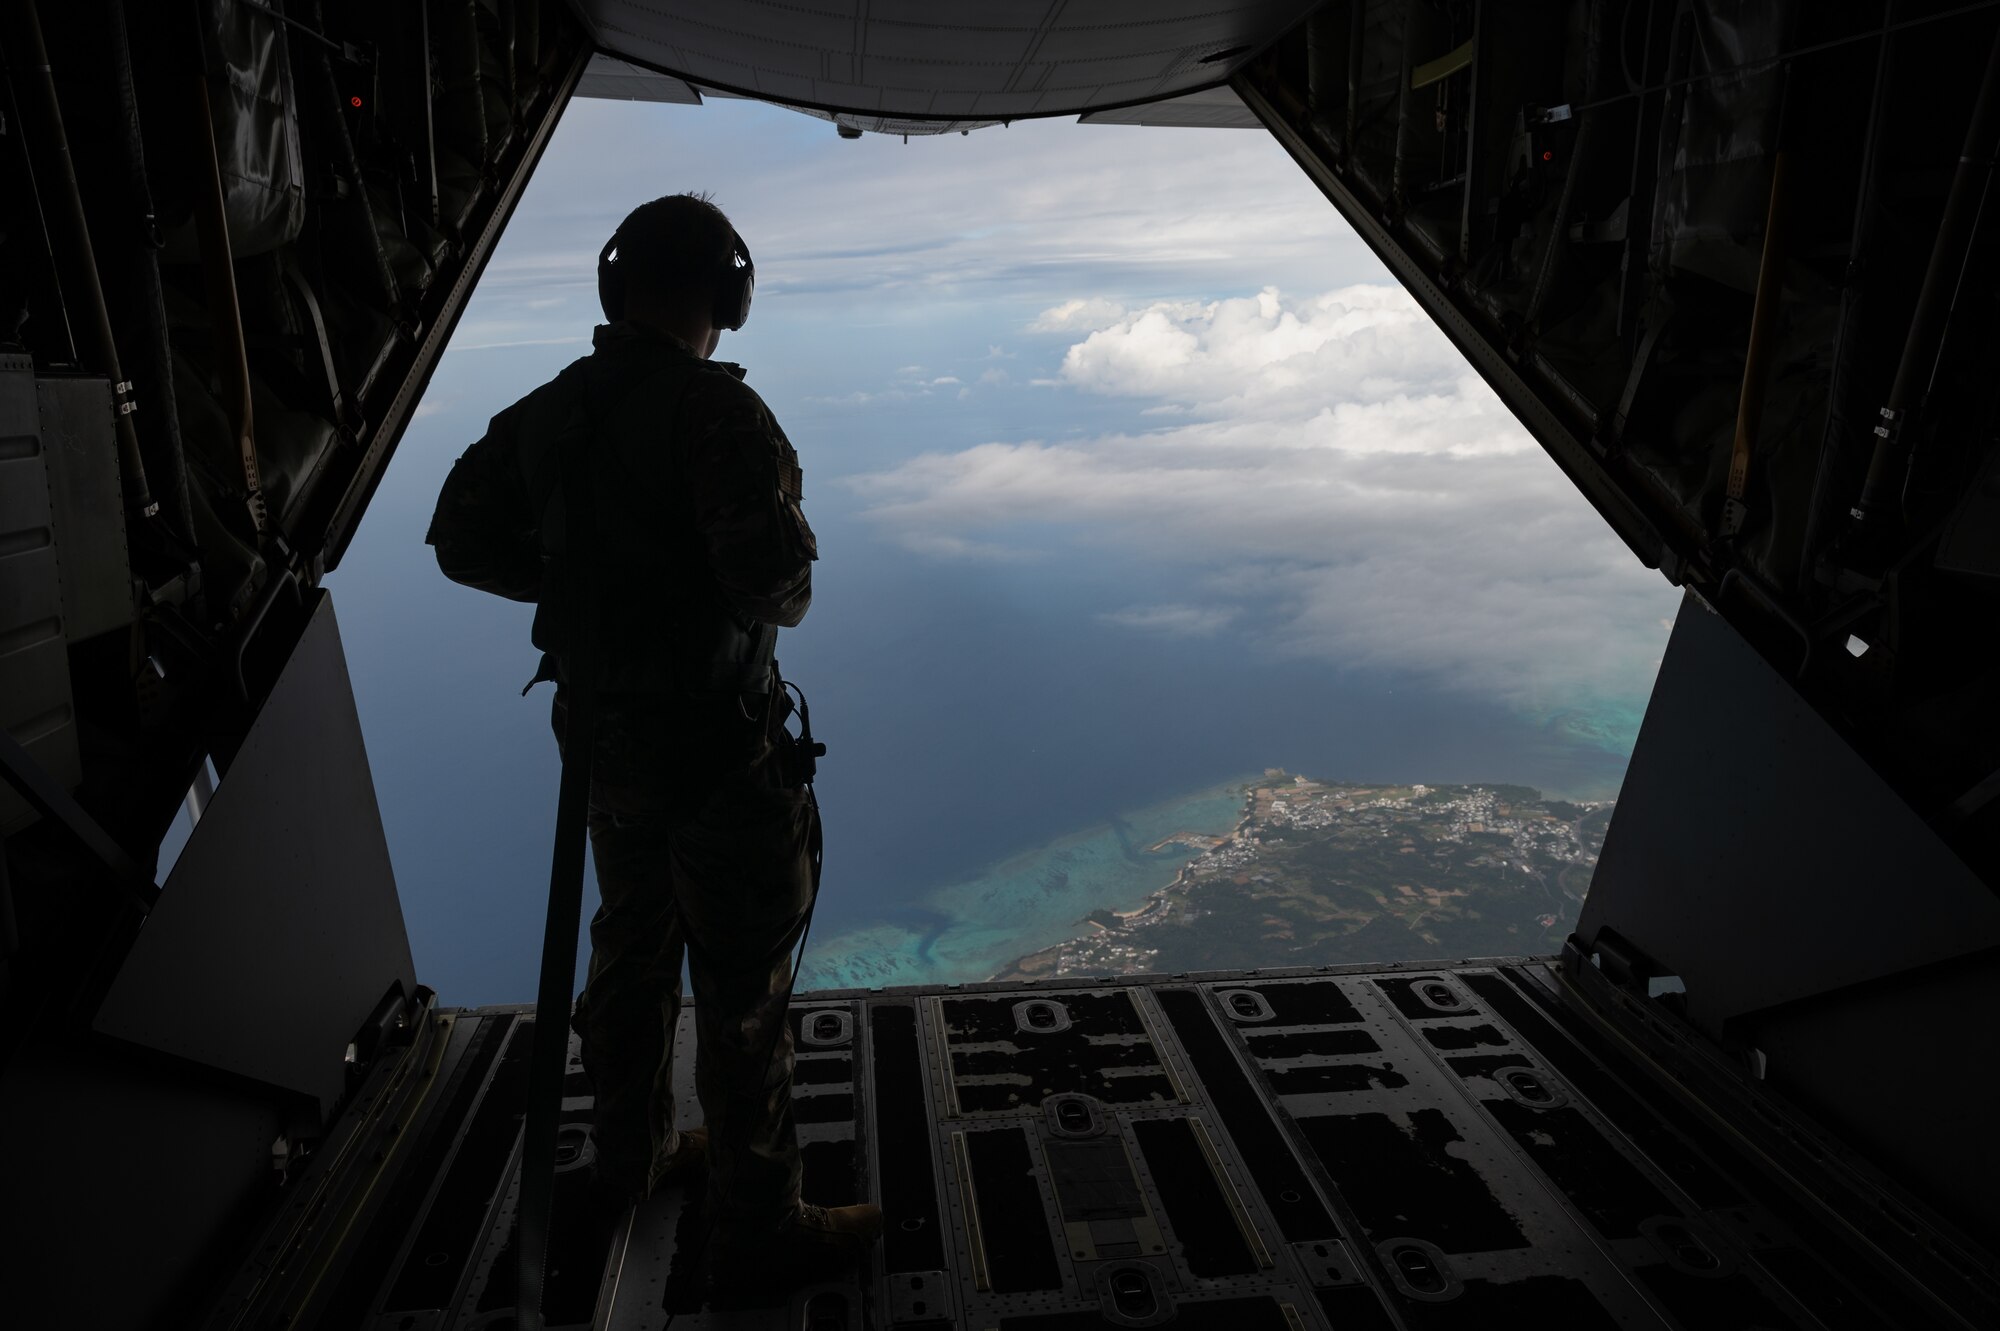 A service member looks out the back of an MC-130J